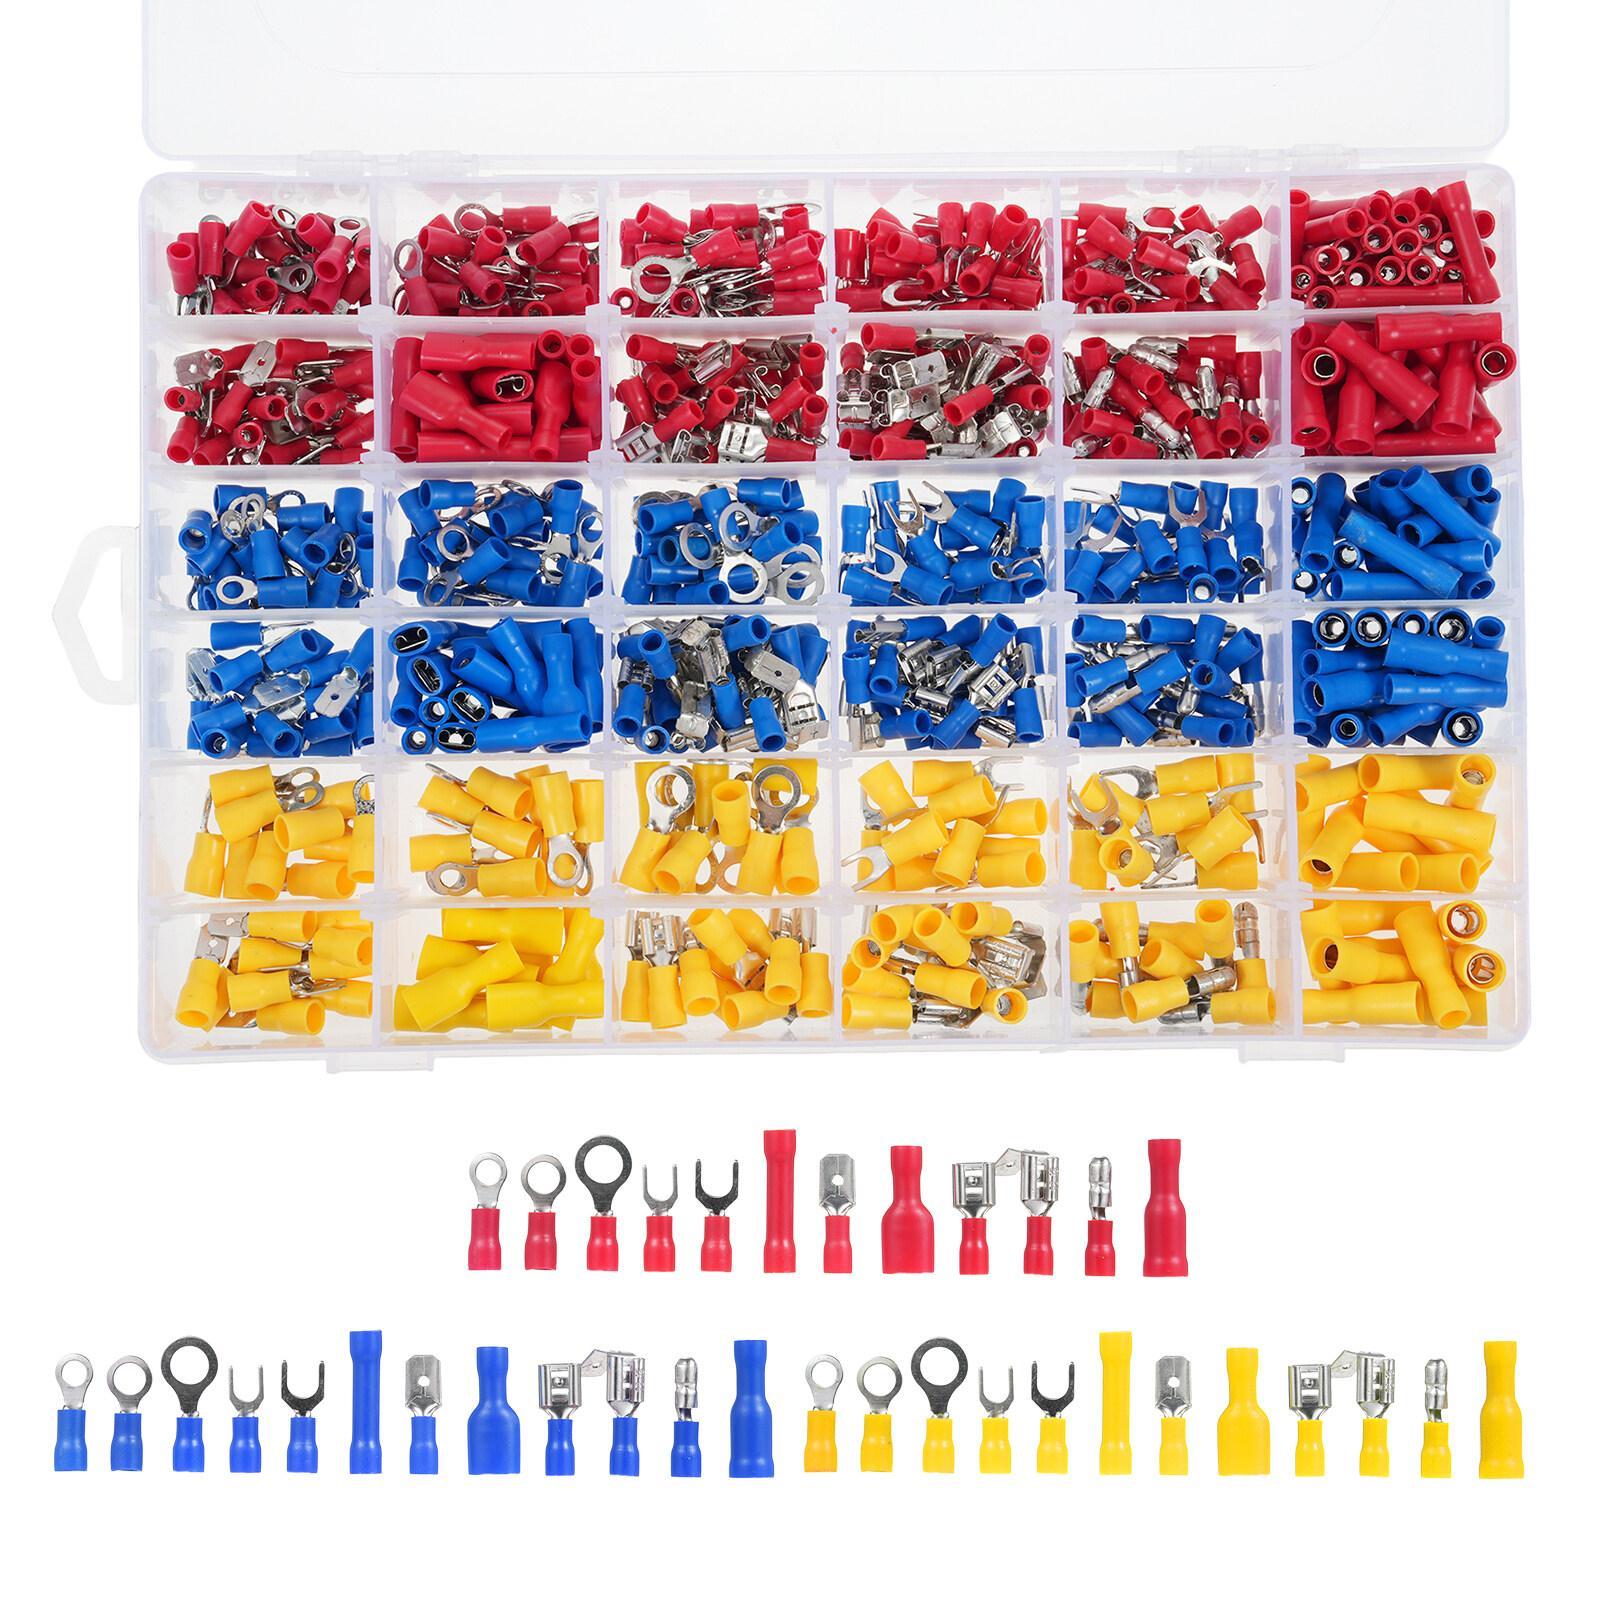 840PCS Cold Pressure Terminal Set Electrical Wire Connectors, Insulated Wire Crimp Terminals, Mixed Butt Ring Fork Spade Bullet Piggy Back Quick Disconnect Assortment Kit